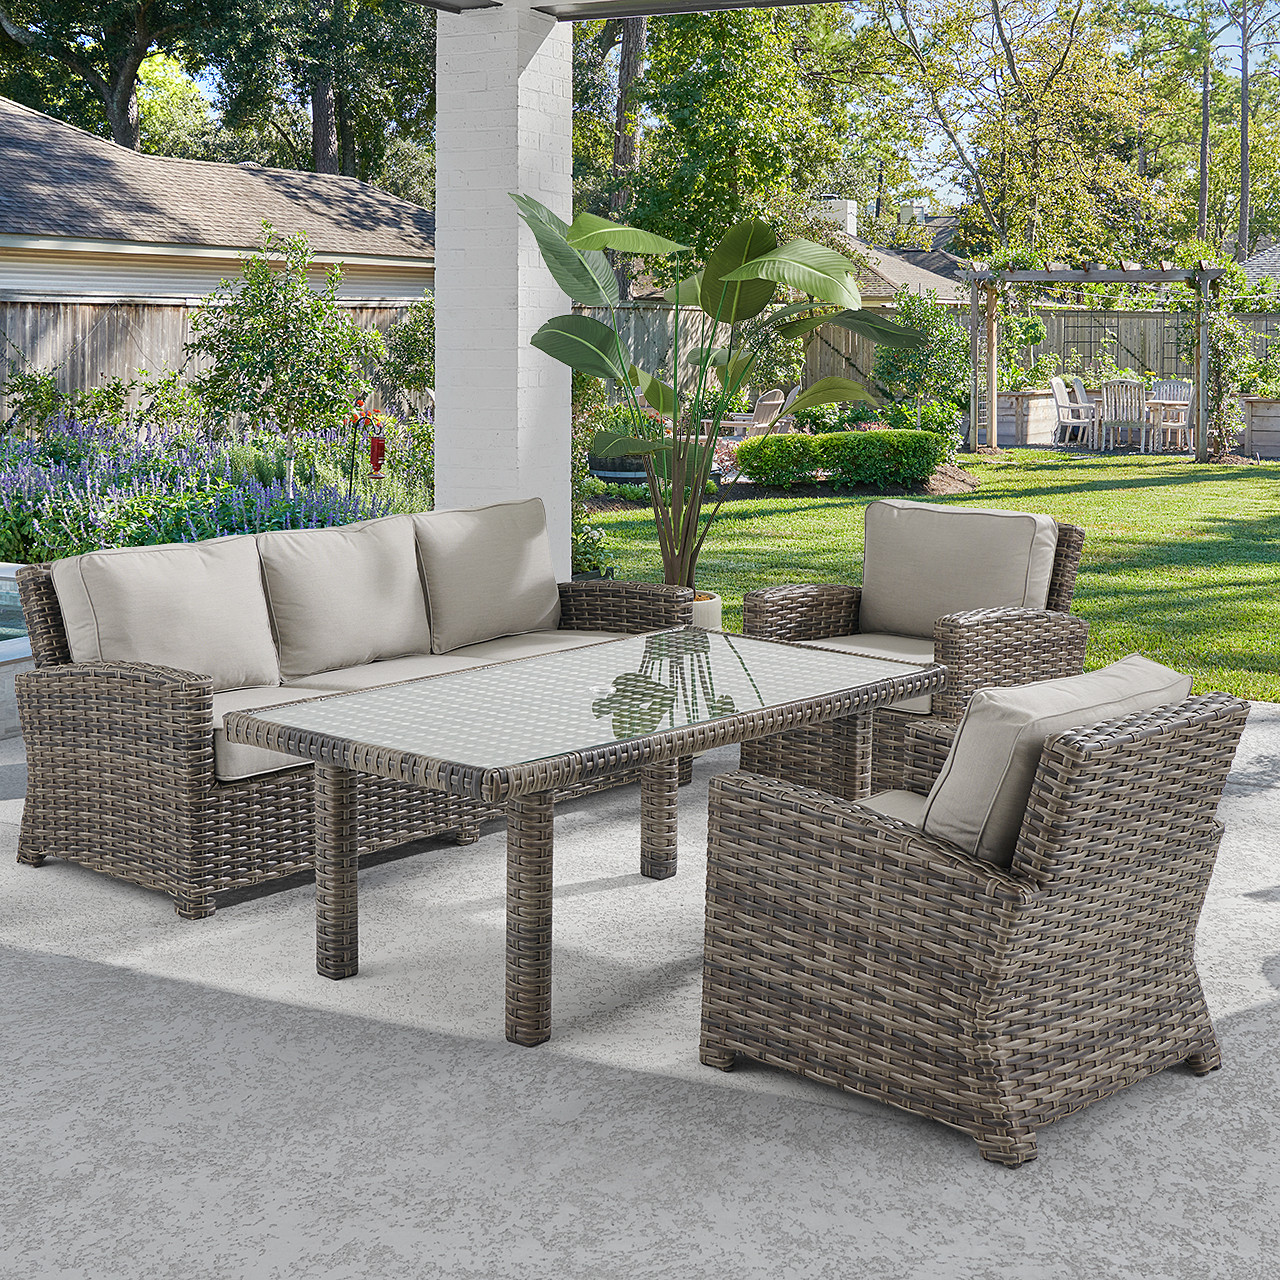 Contempo Husk Outdoor Wicker with Cushions 4 Pc. Sofa Group + 65 x 34 in. Lounge Dining Table